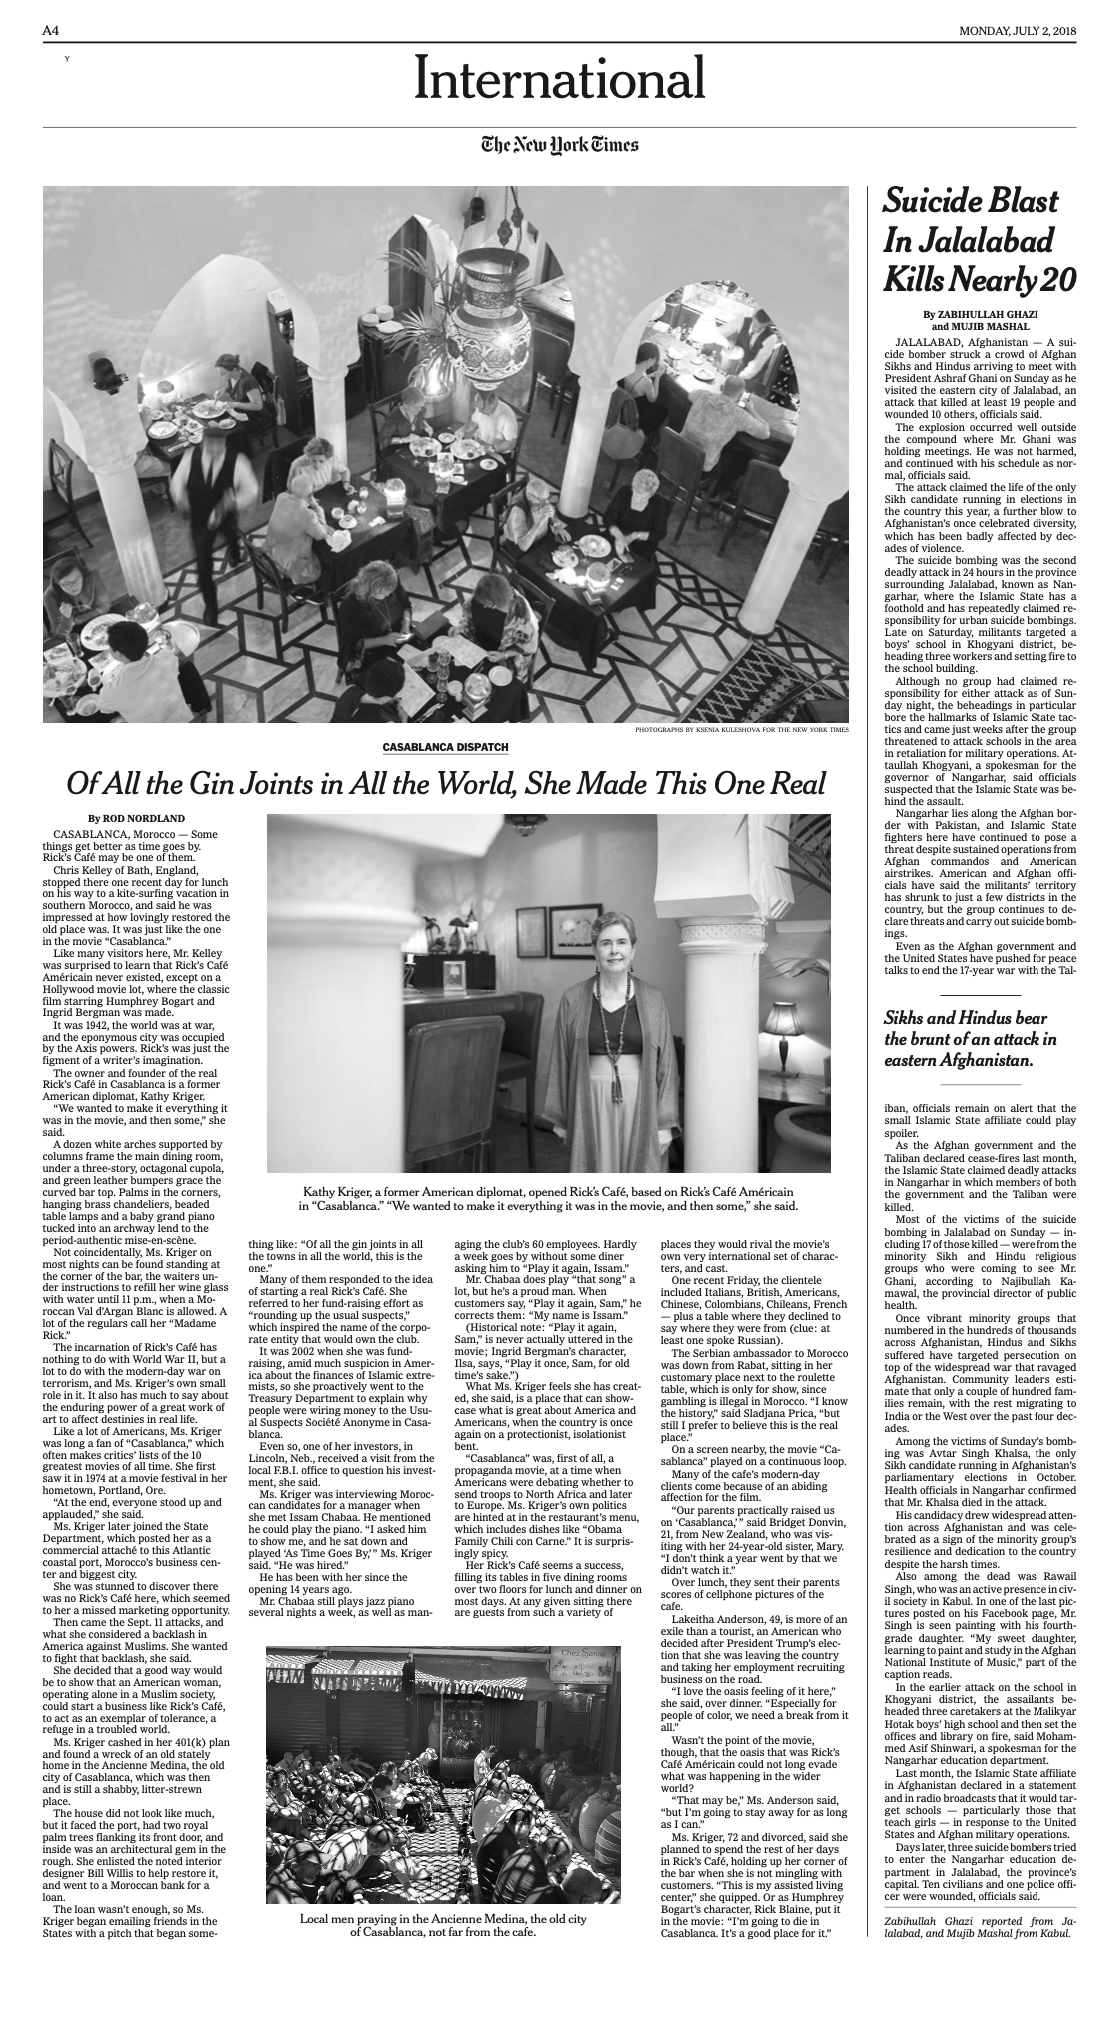  Publication:   The New York Times   Date: 02.07.2018   